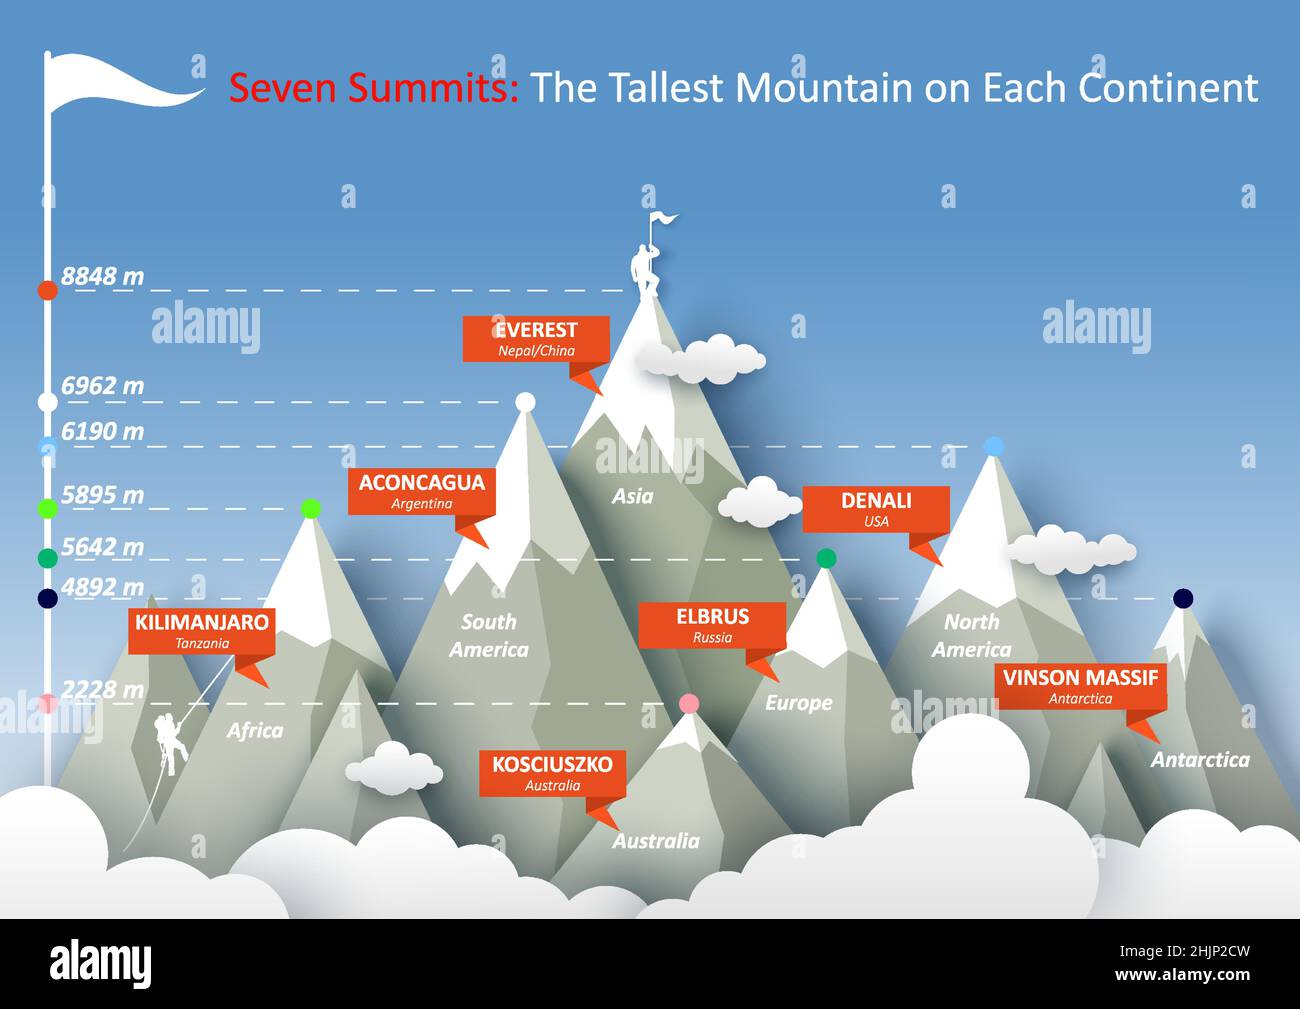 What Are the Seven Summits?